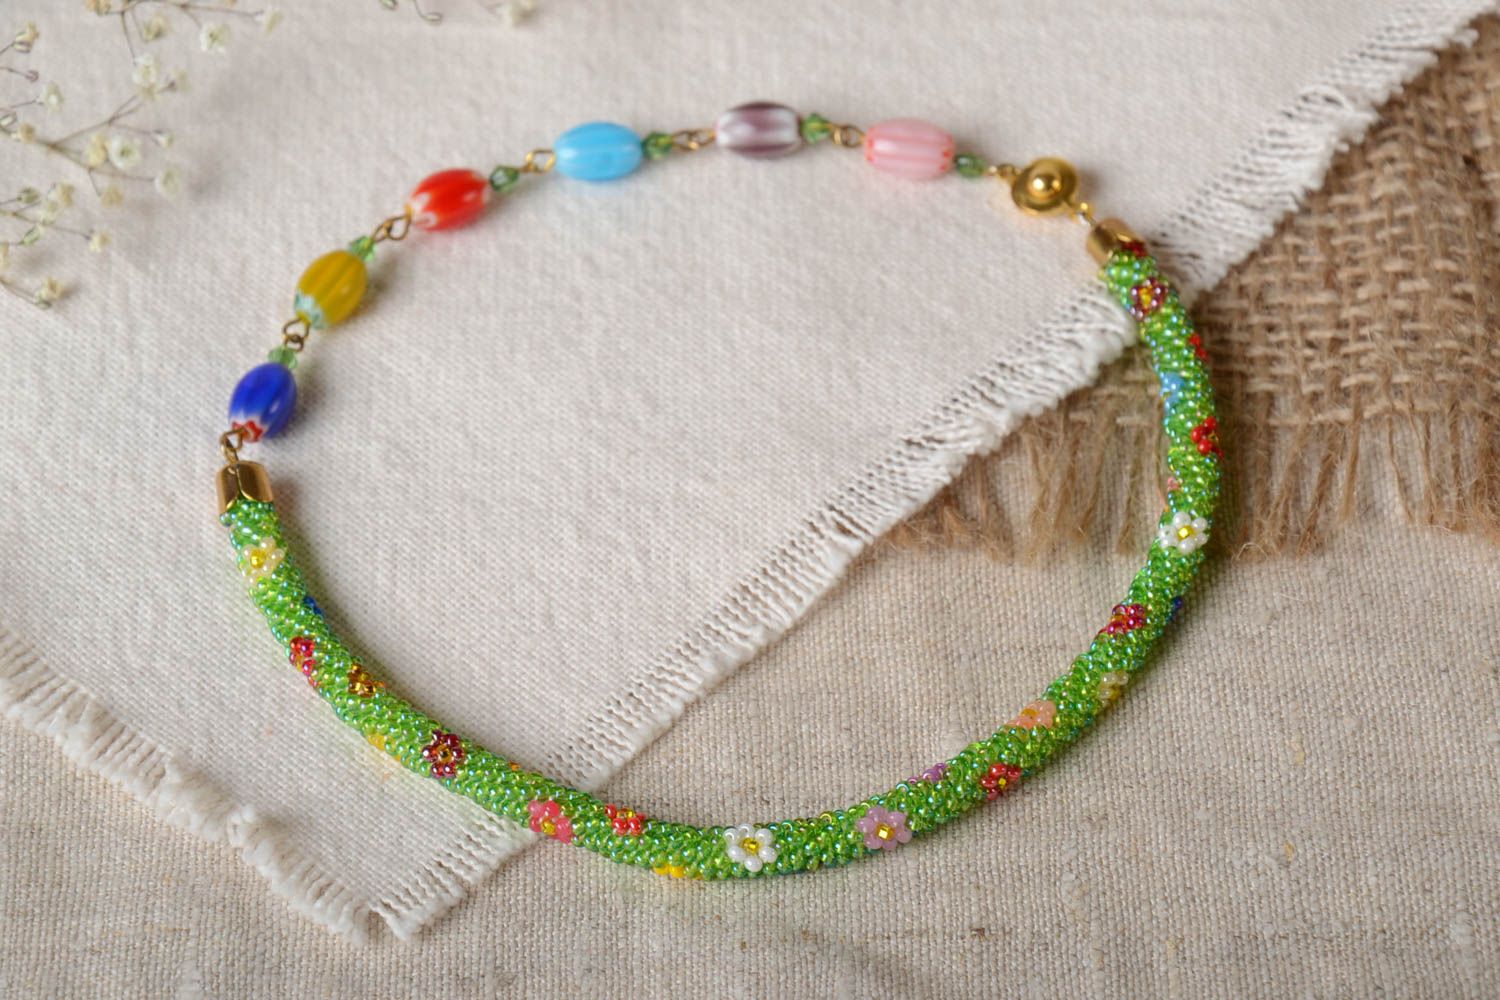 Beautiful homemade thin beaded necklace beaded cord necklace designer jewelry photo 1